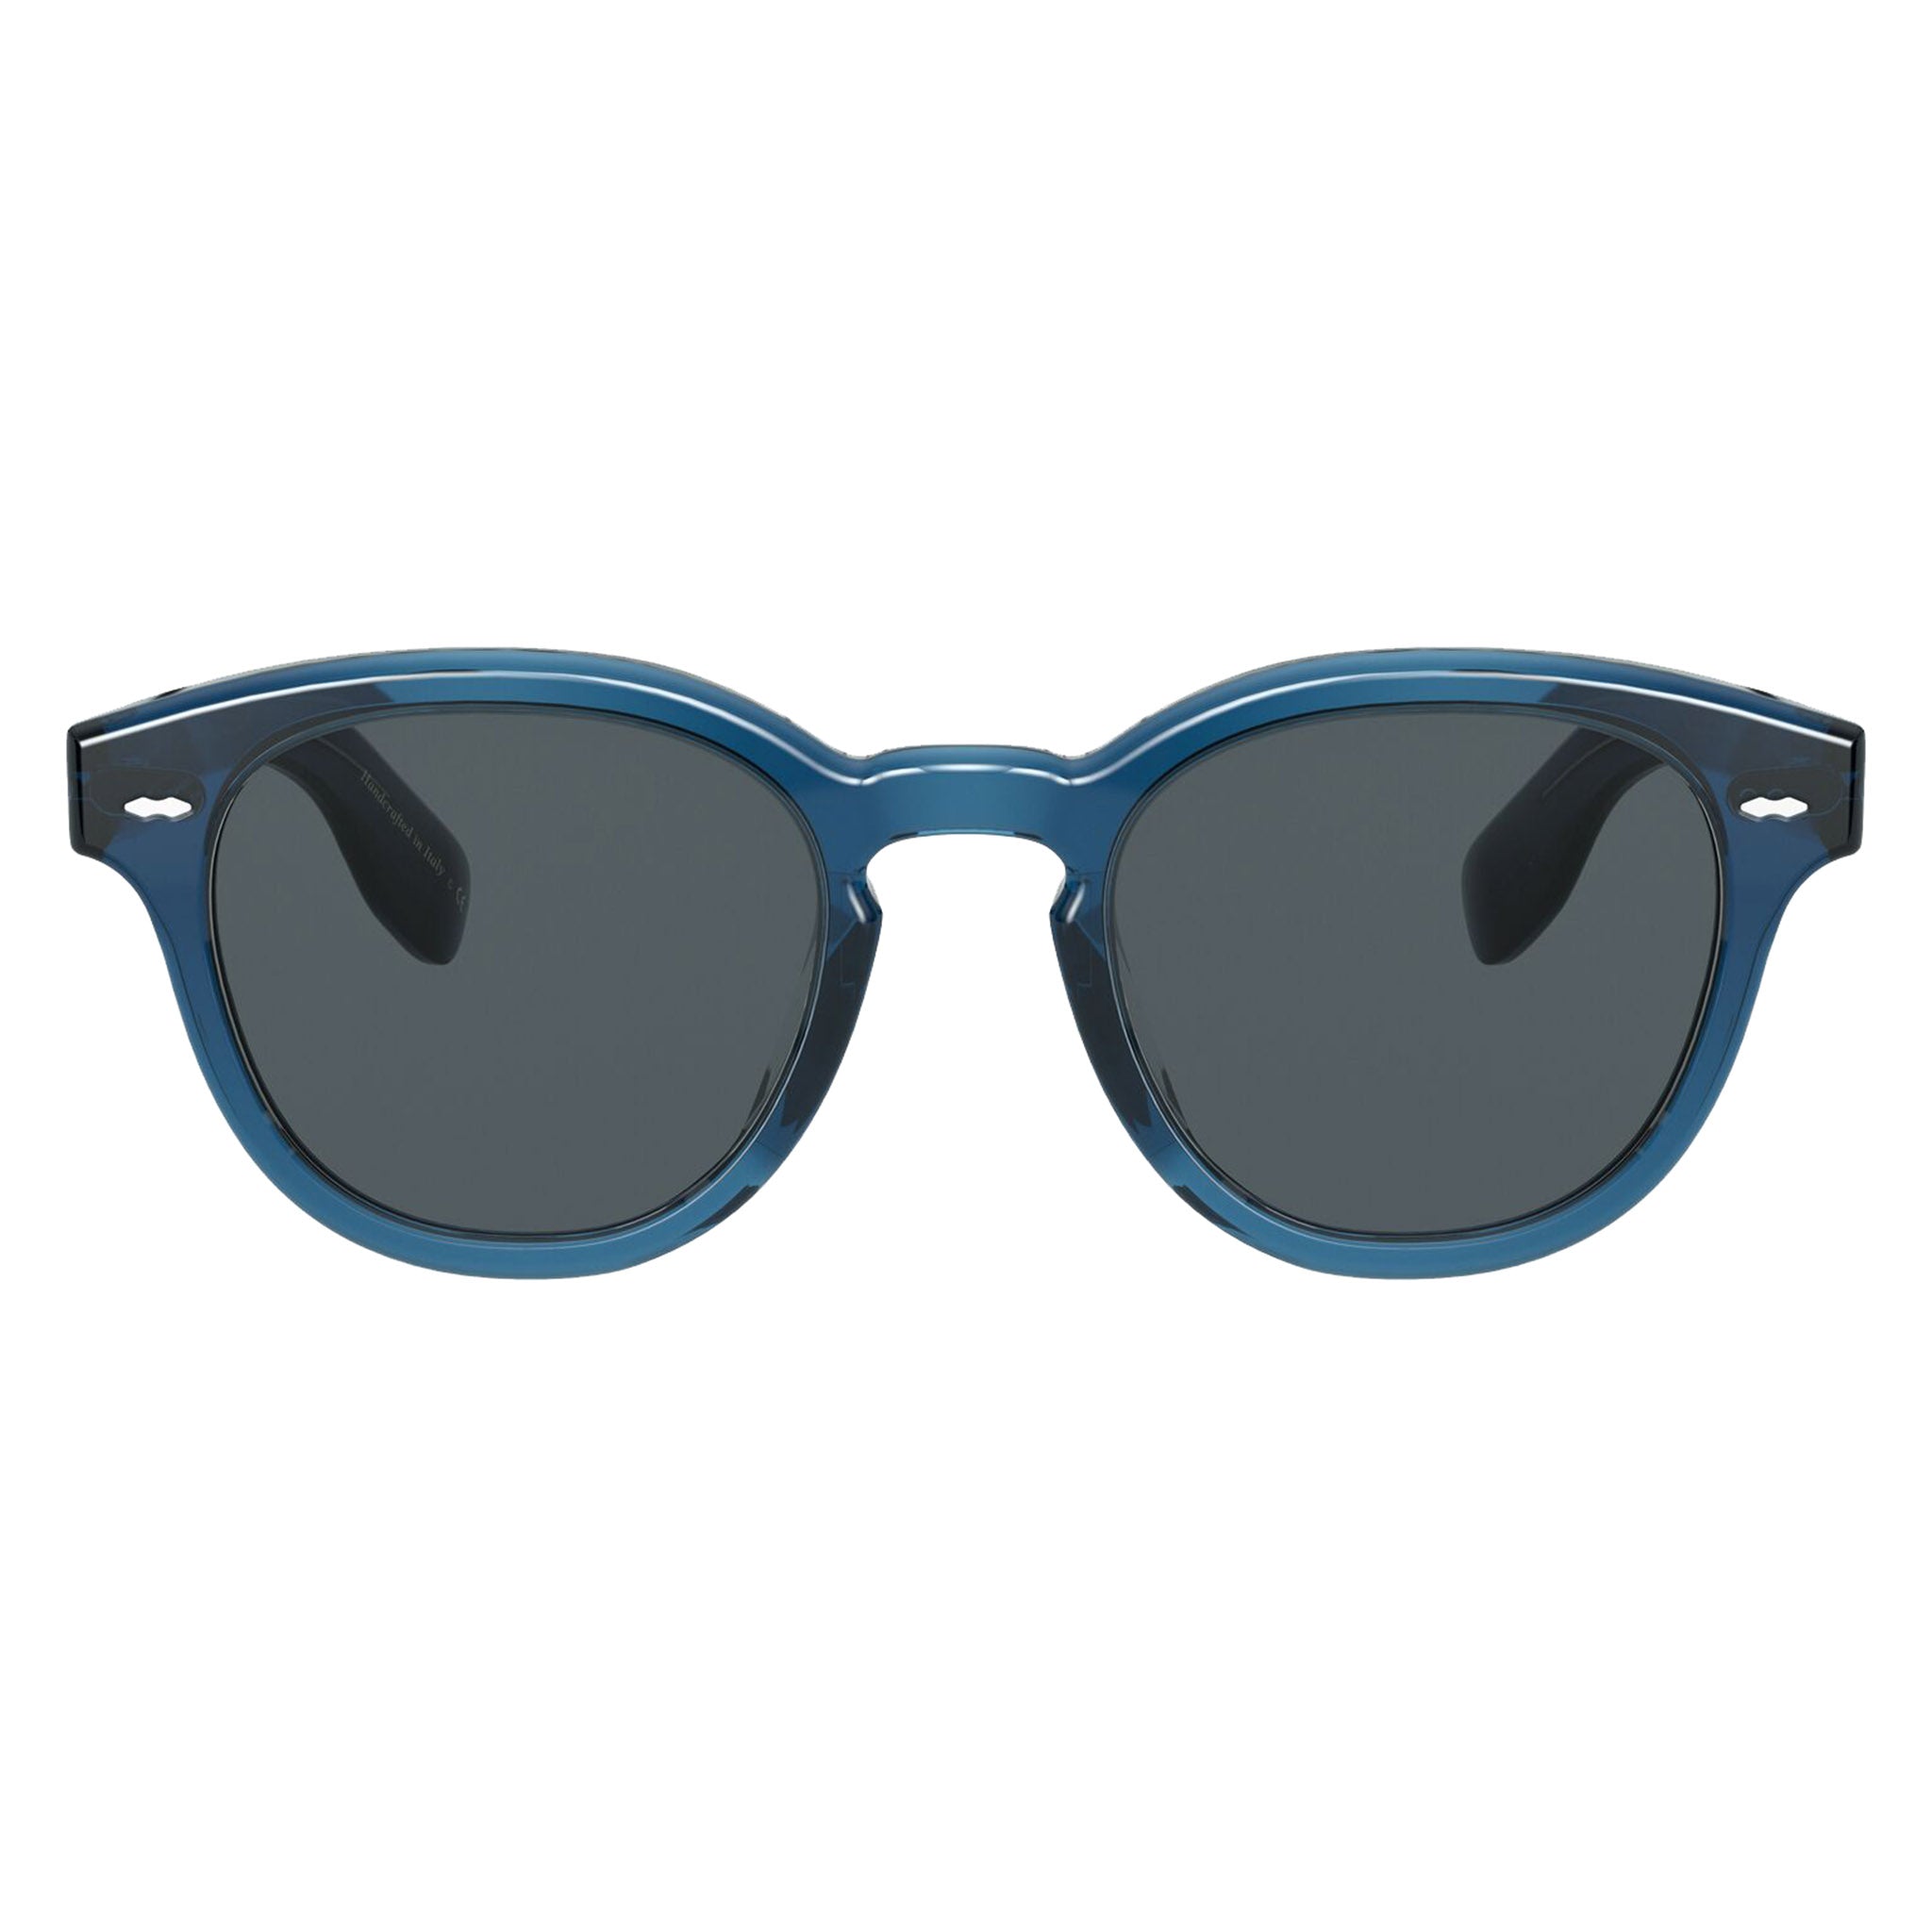 Oliver Peoples Cary Grant Sun Blue with Blue Sunglass